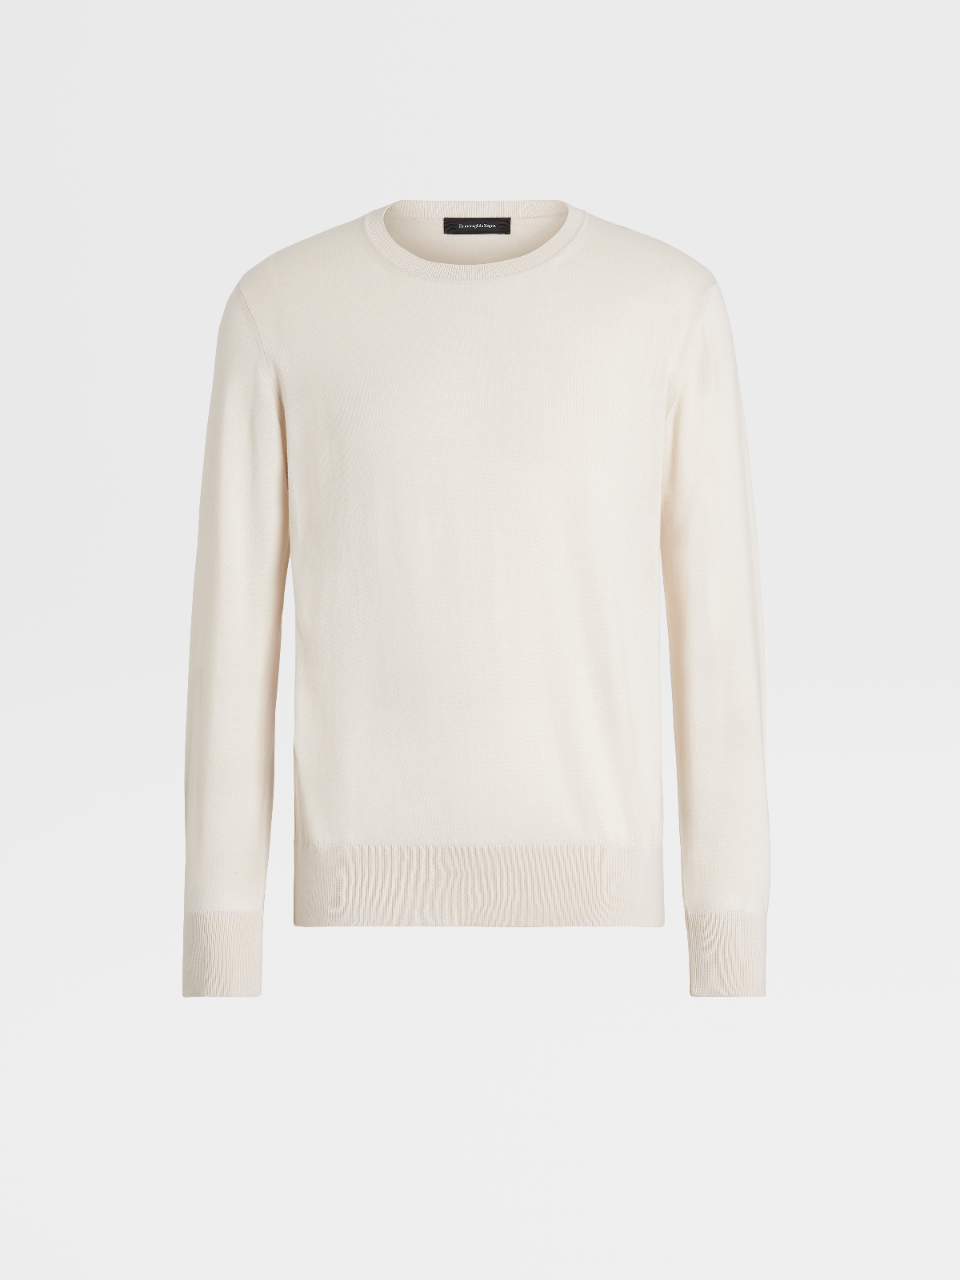 Off-white Baby Island Cotton and Cashmere Knit Crewneck